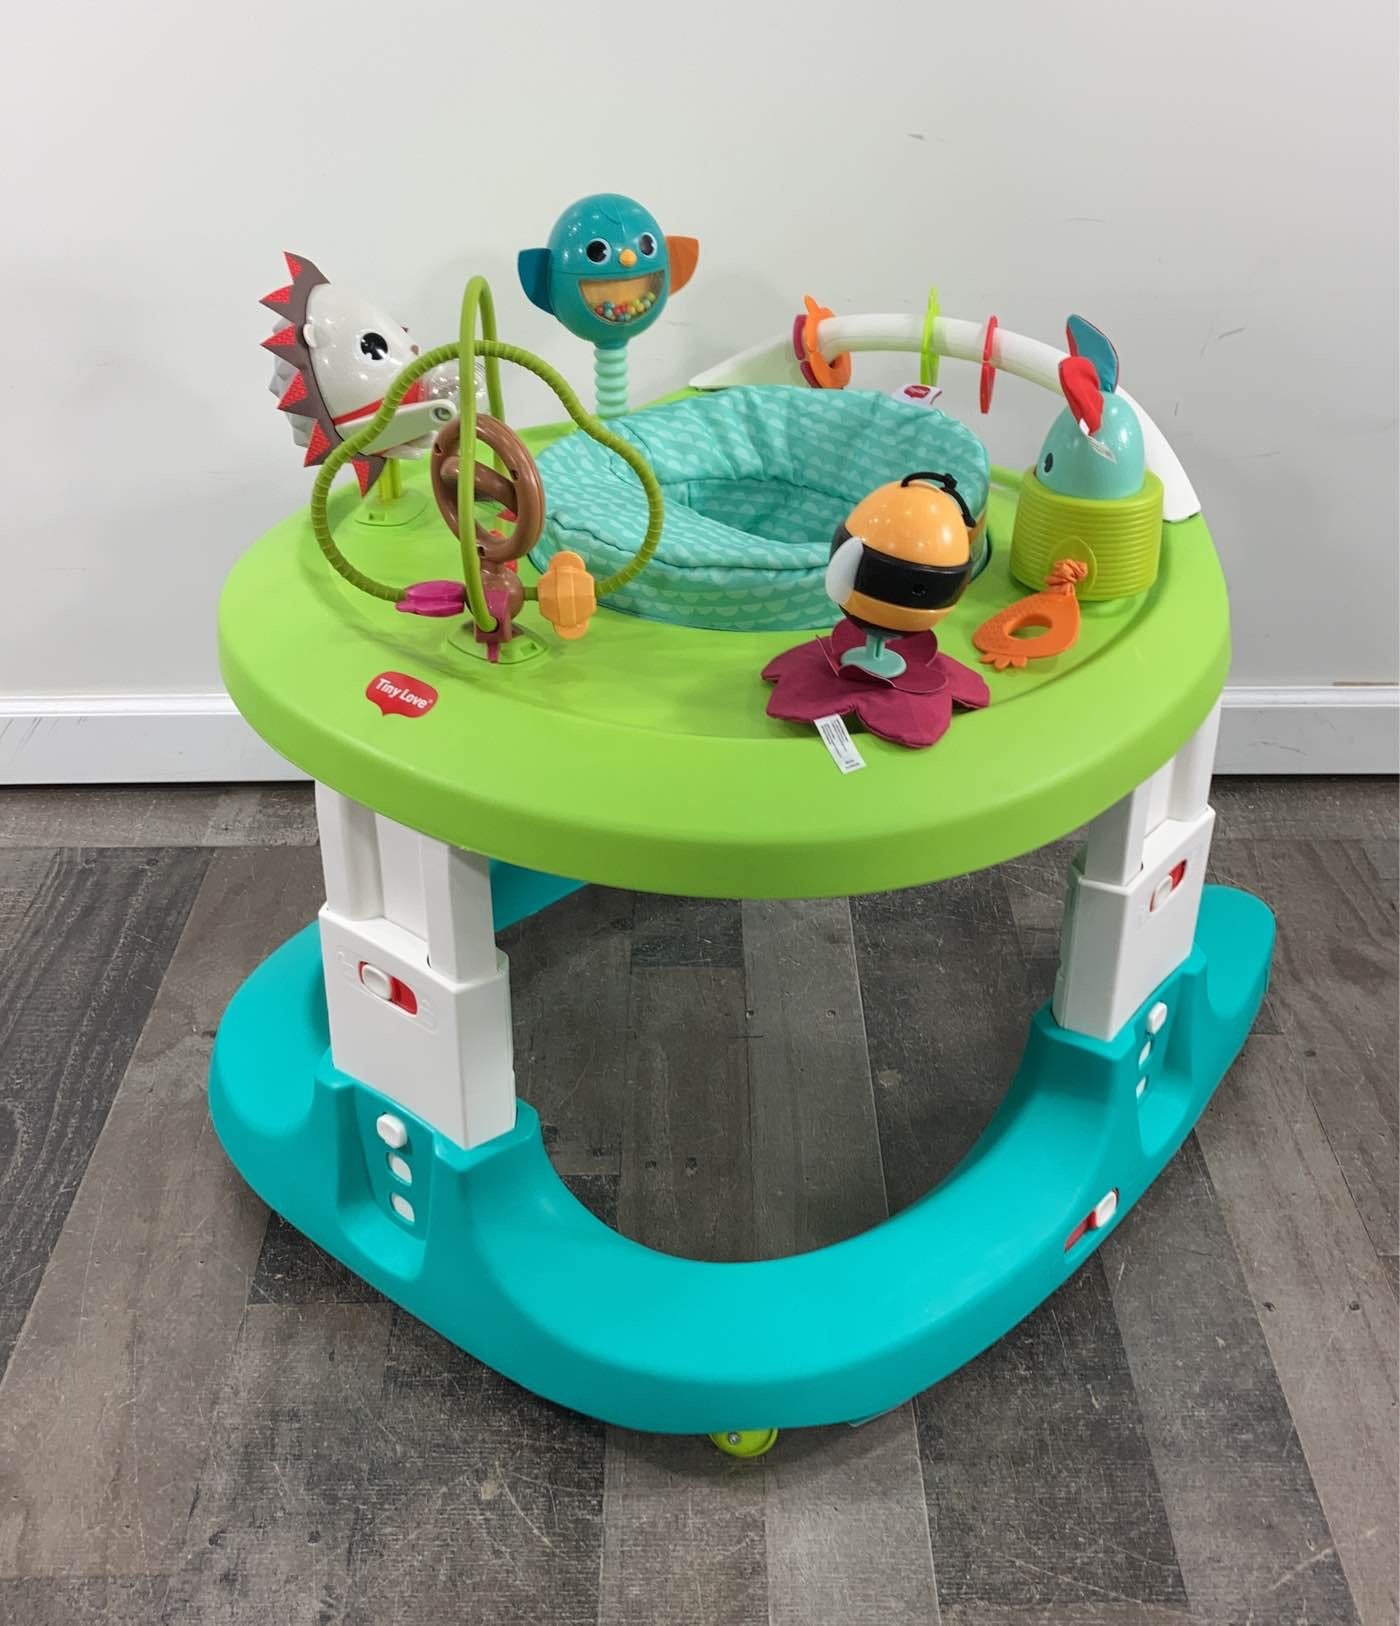 Tiny Love 4-in-1 Here I Grow Mobile Activity Center, Baby Walkers,  Activity Centers & Jumpers